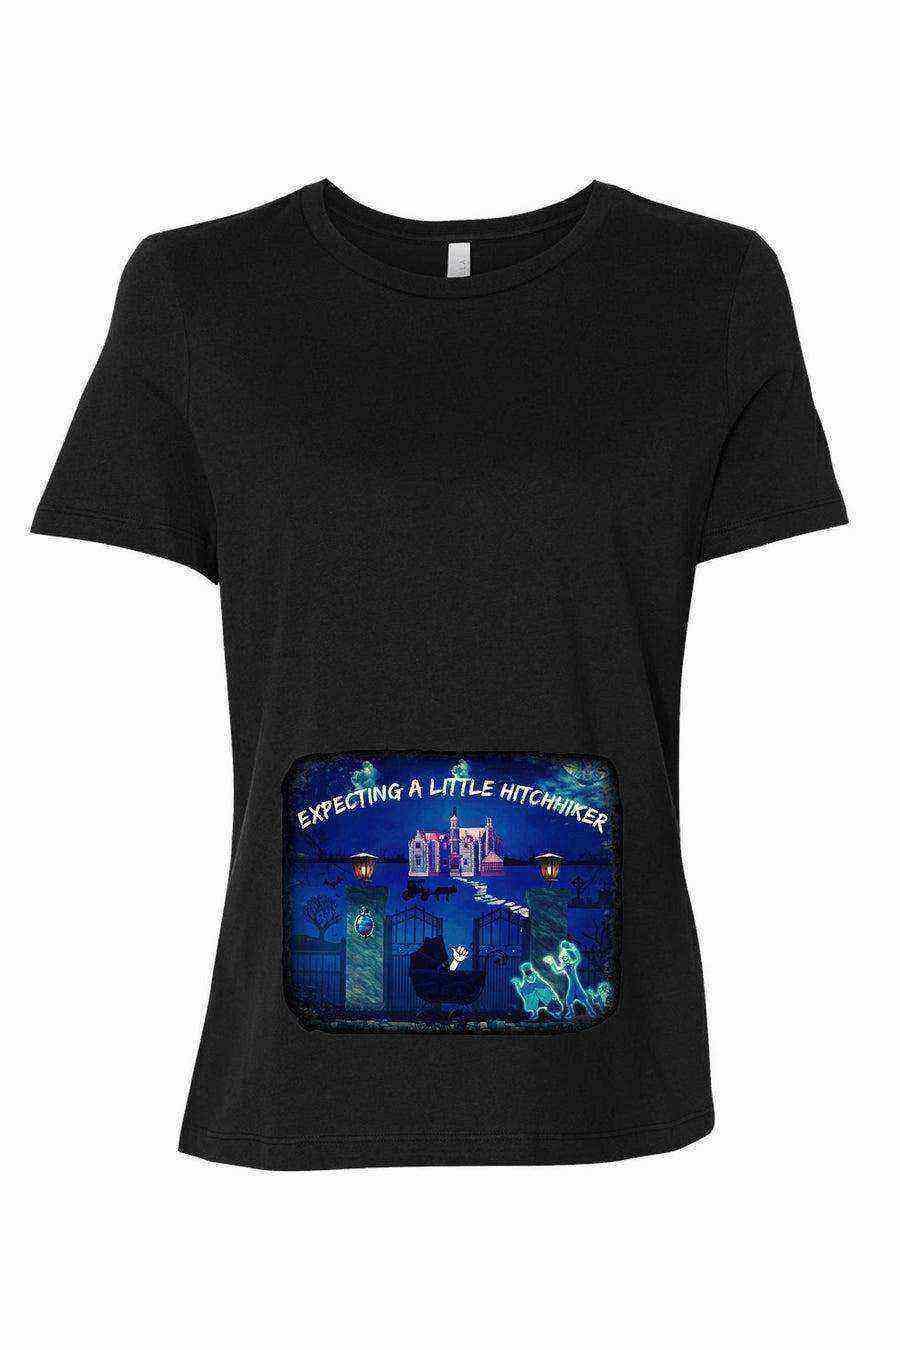 Haunted Mansion Maternity Shirt | Halloween Maternity - Dylan's Tees